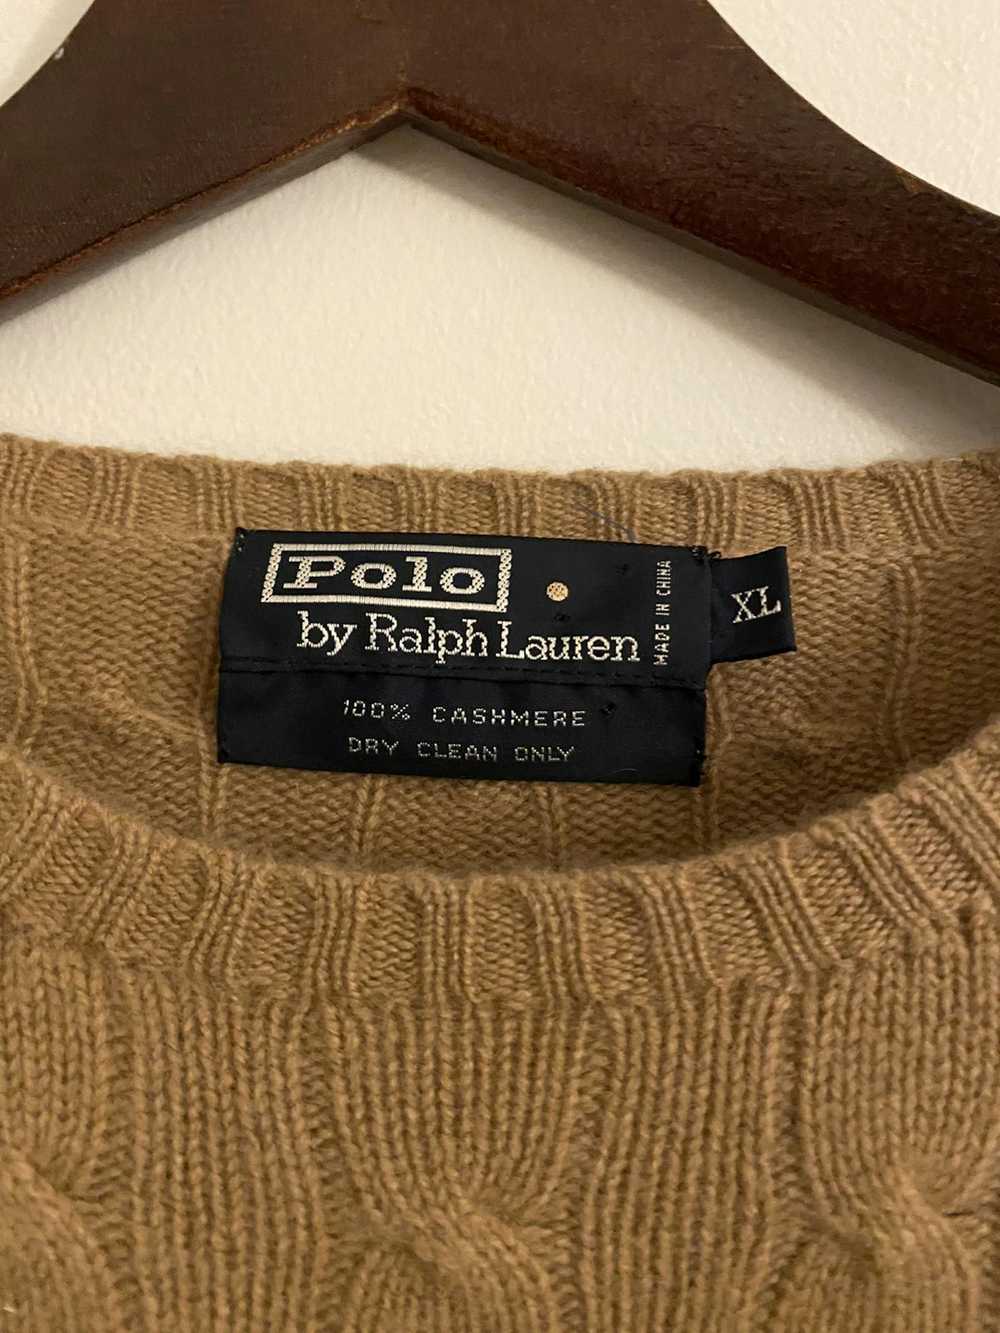 Polo Ralph Lauren 100% Cashmere Cable Knit Sweater - image 2